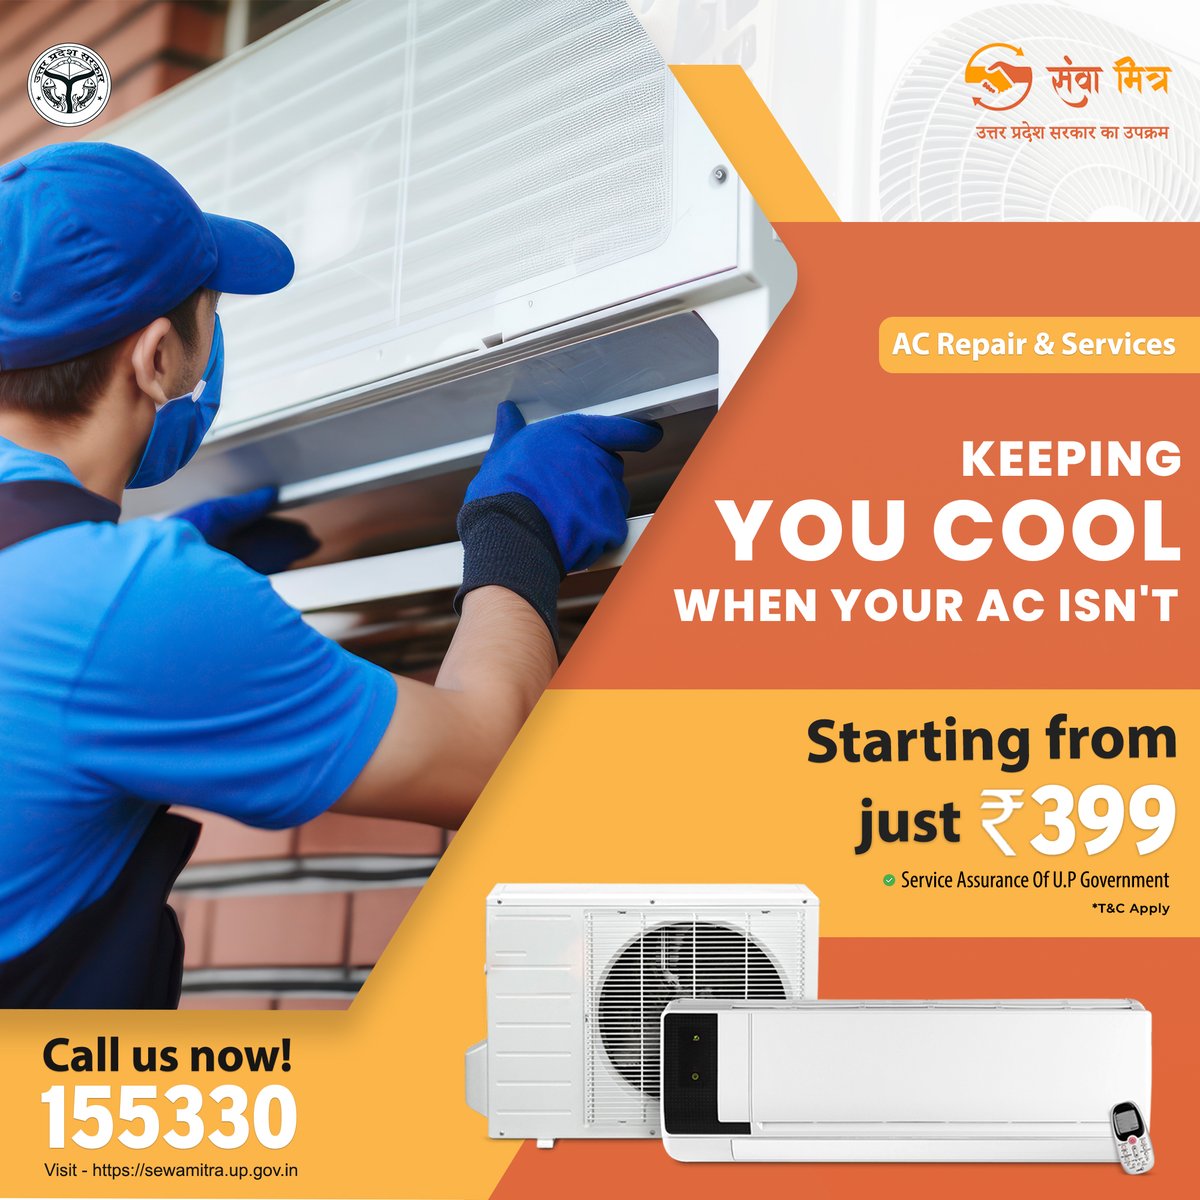 'Efficient, affordable, dependable AC repair.'

visit: sewamitra.up.gov.in
#airconditioning #hvac #heating #hvaclife #airconditioner #hvacservice #ac #cooling #hvactechnician #hvactech #heatingandcooling #hvacrepair #hvacinstall 

— feeling cool in Uttar Pradesh.